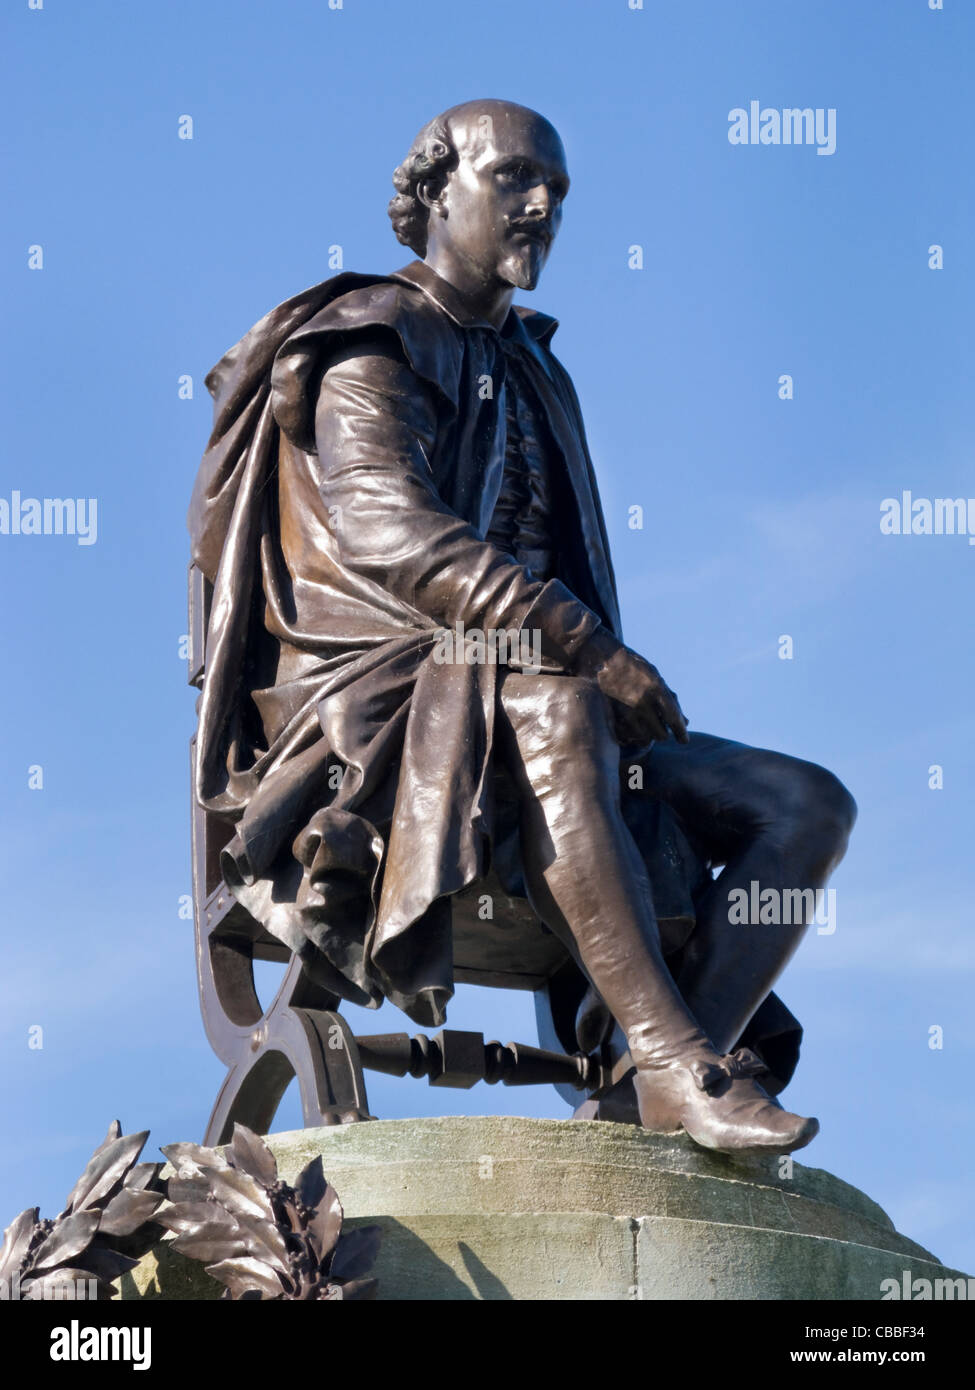 Statue of William Shakespeare (part of the Gower Memorial) in Stratford's Bancroft Gardens. Stratford-upon-Avon. UK. Stock Photo